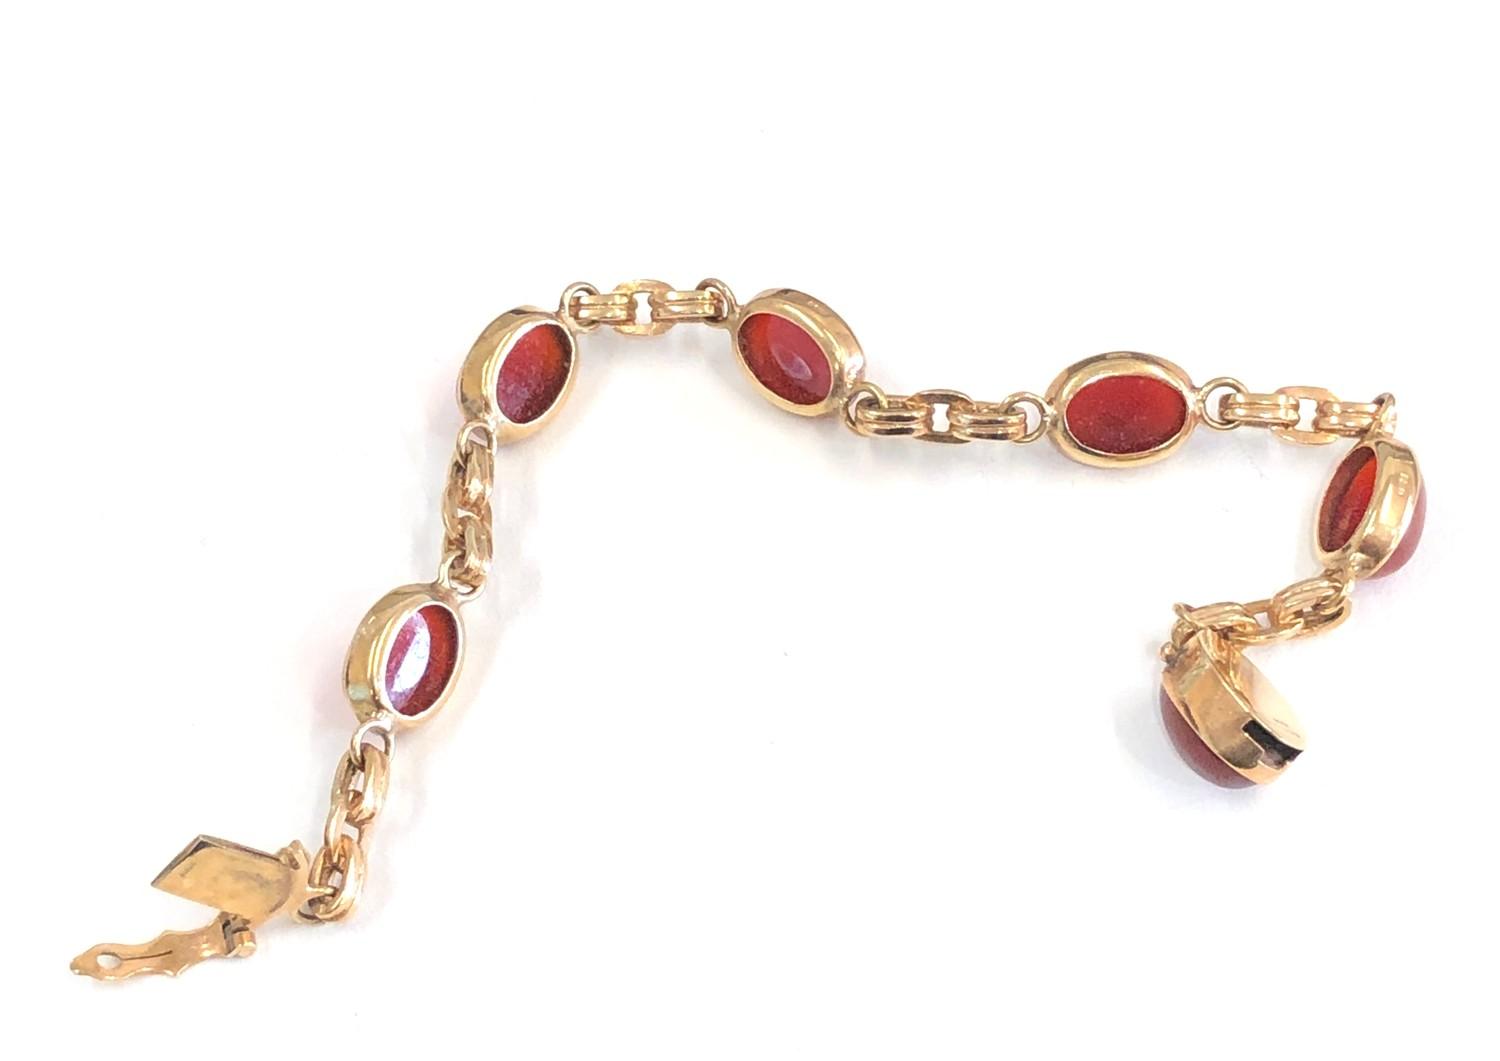 Vintage 9ct gold and cornelian set bracelet measures approx 19cm long weight 14.91g hallmarked 9.375 - Image 2 of 4